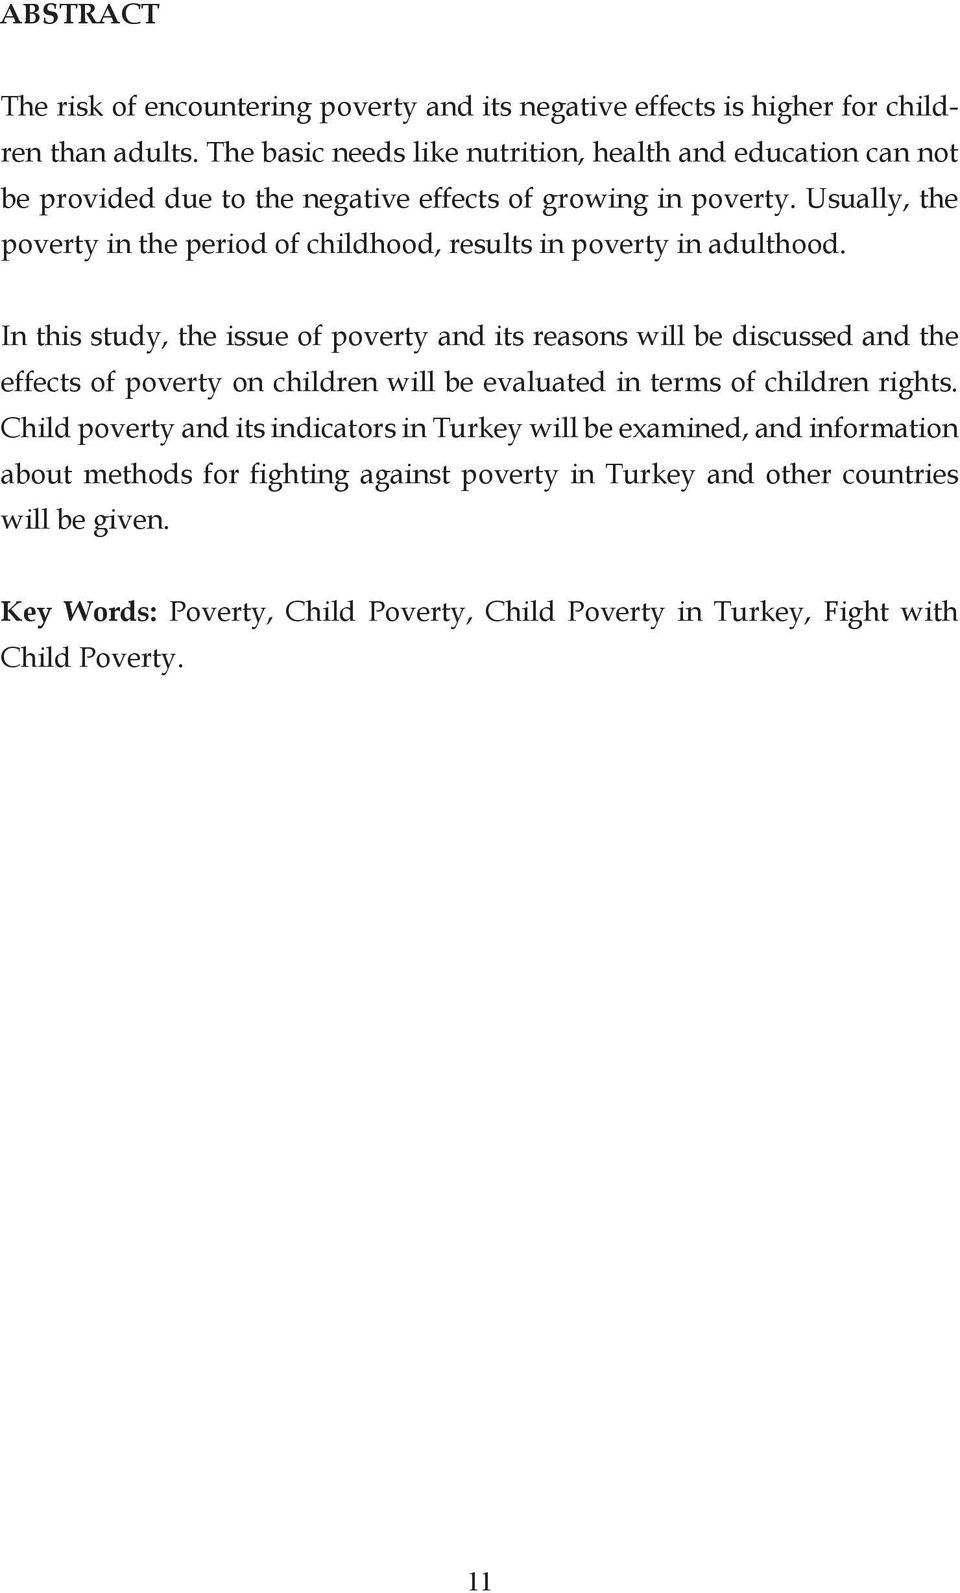 Usually, the poverty in the period of childhood, results in poverty in adulthood.